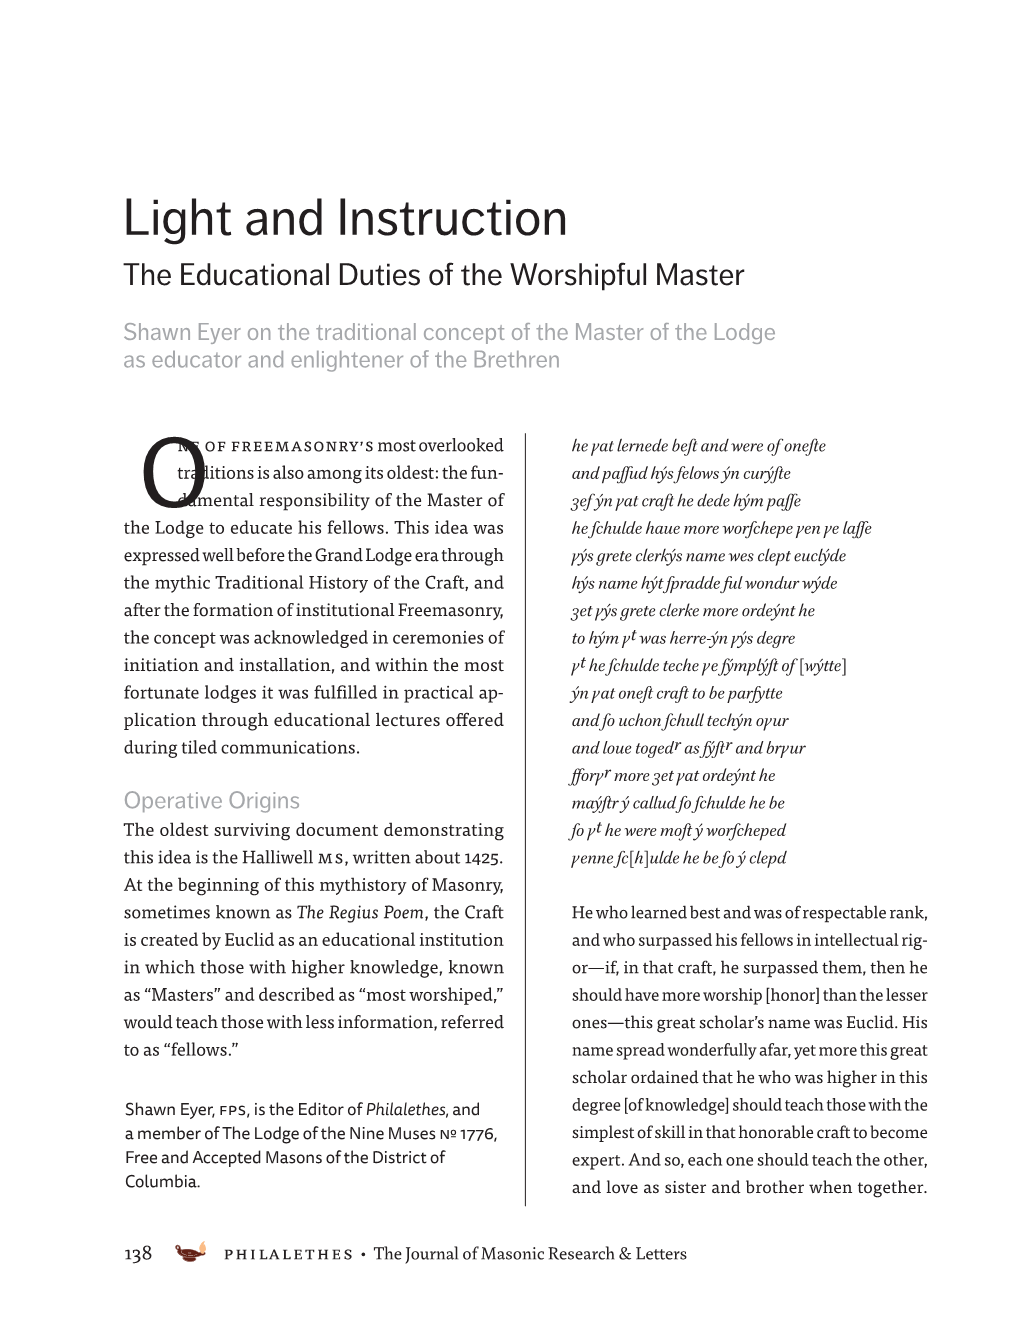 Light and Instruction the Educational Duties of the Worshipful Master